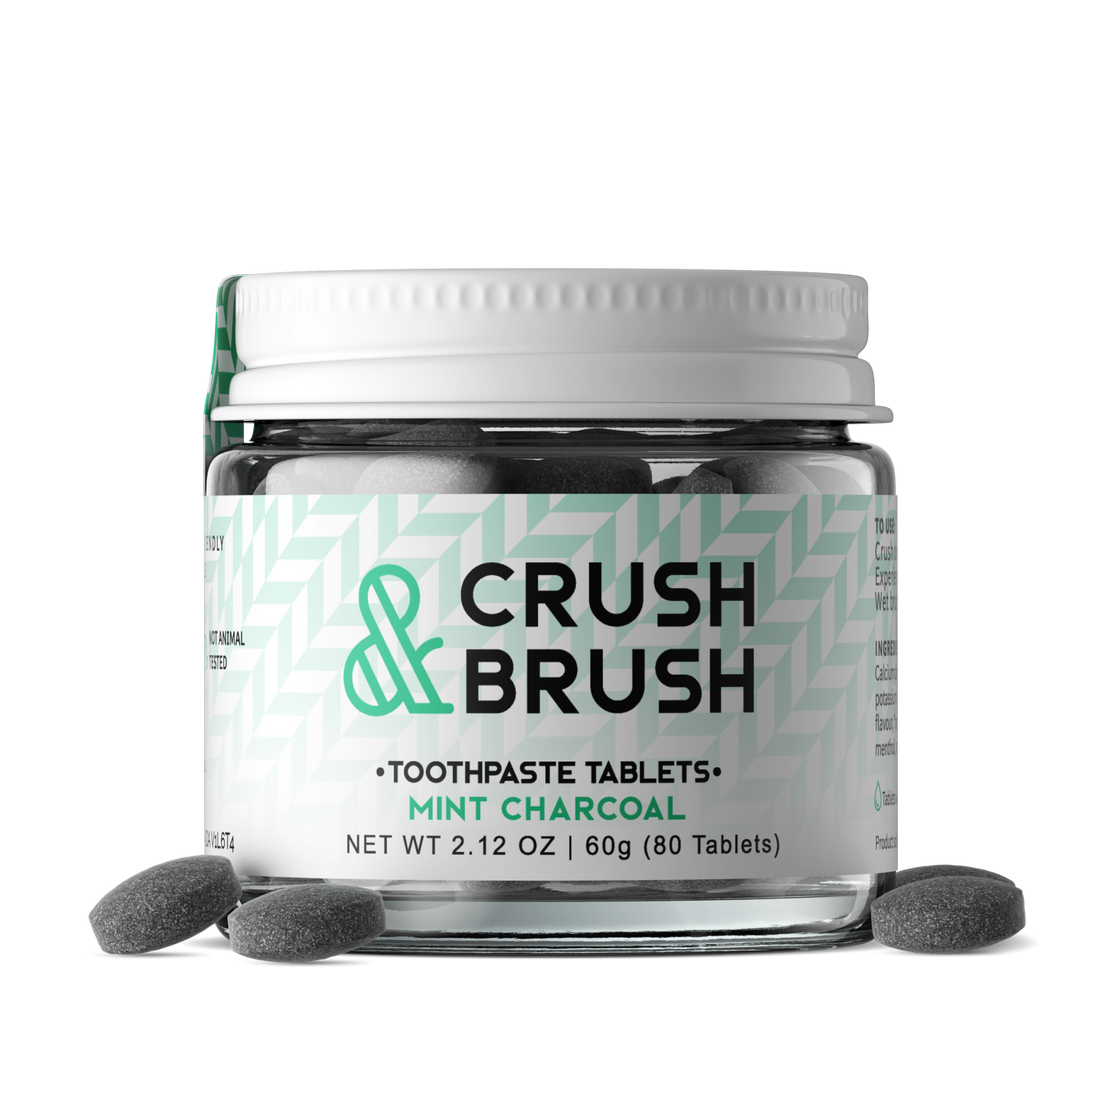 Crush & Brush Toothpaste Tablets Mint Charcoal